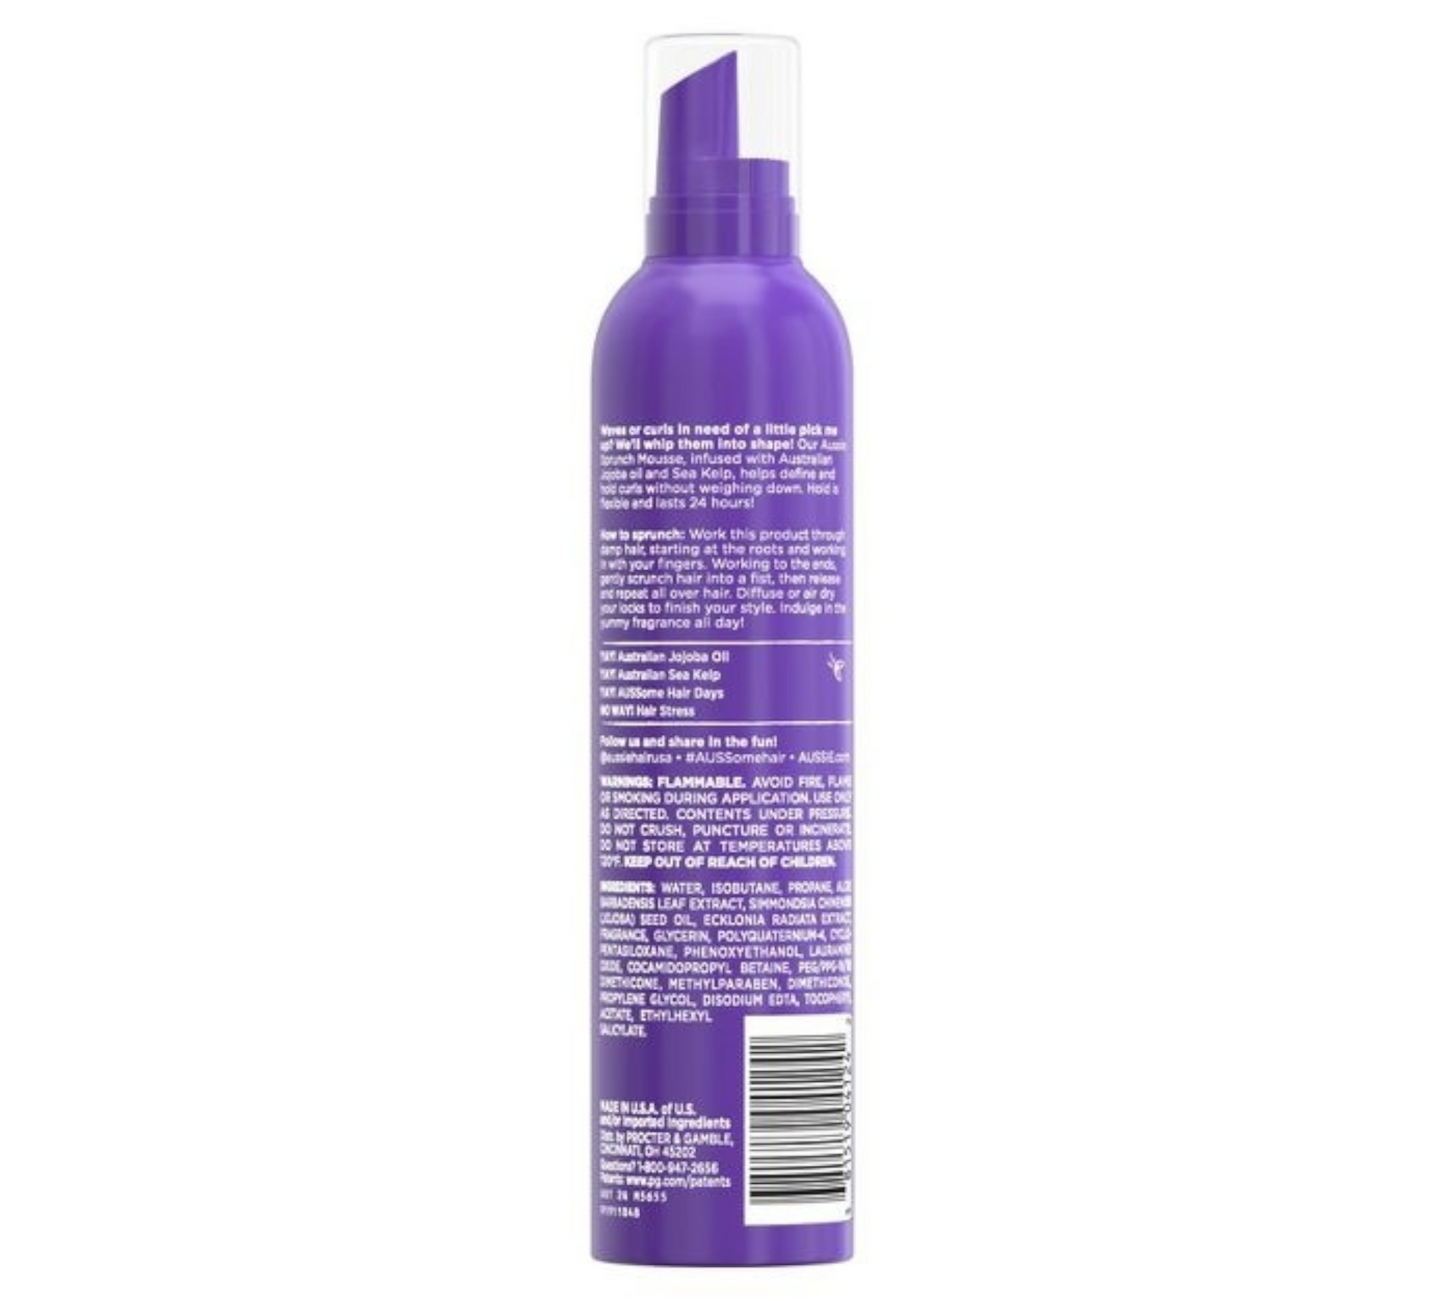 Cupid Beauty Supplies Cupid Beauty Supplies Aussie Sprunch with Jojoba & Sea Kelp Mousse & Leave-in Conditioner - 6.8 fl oz